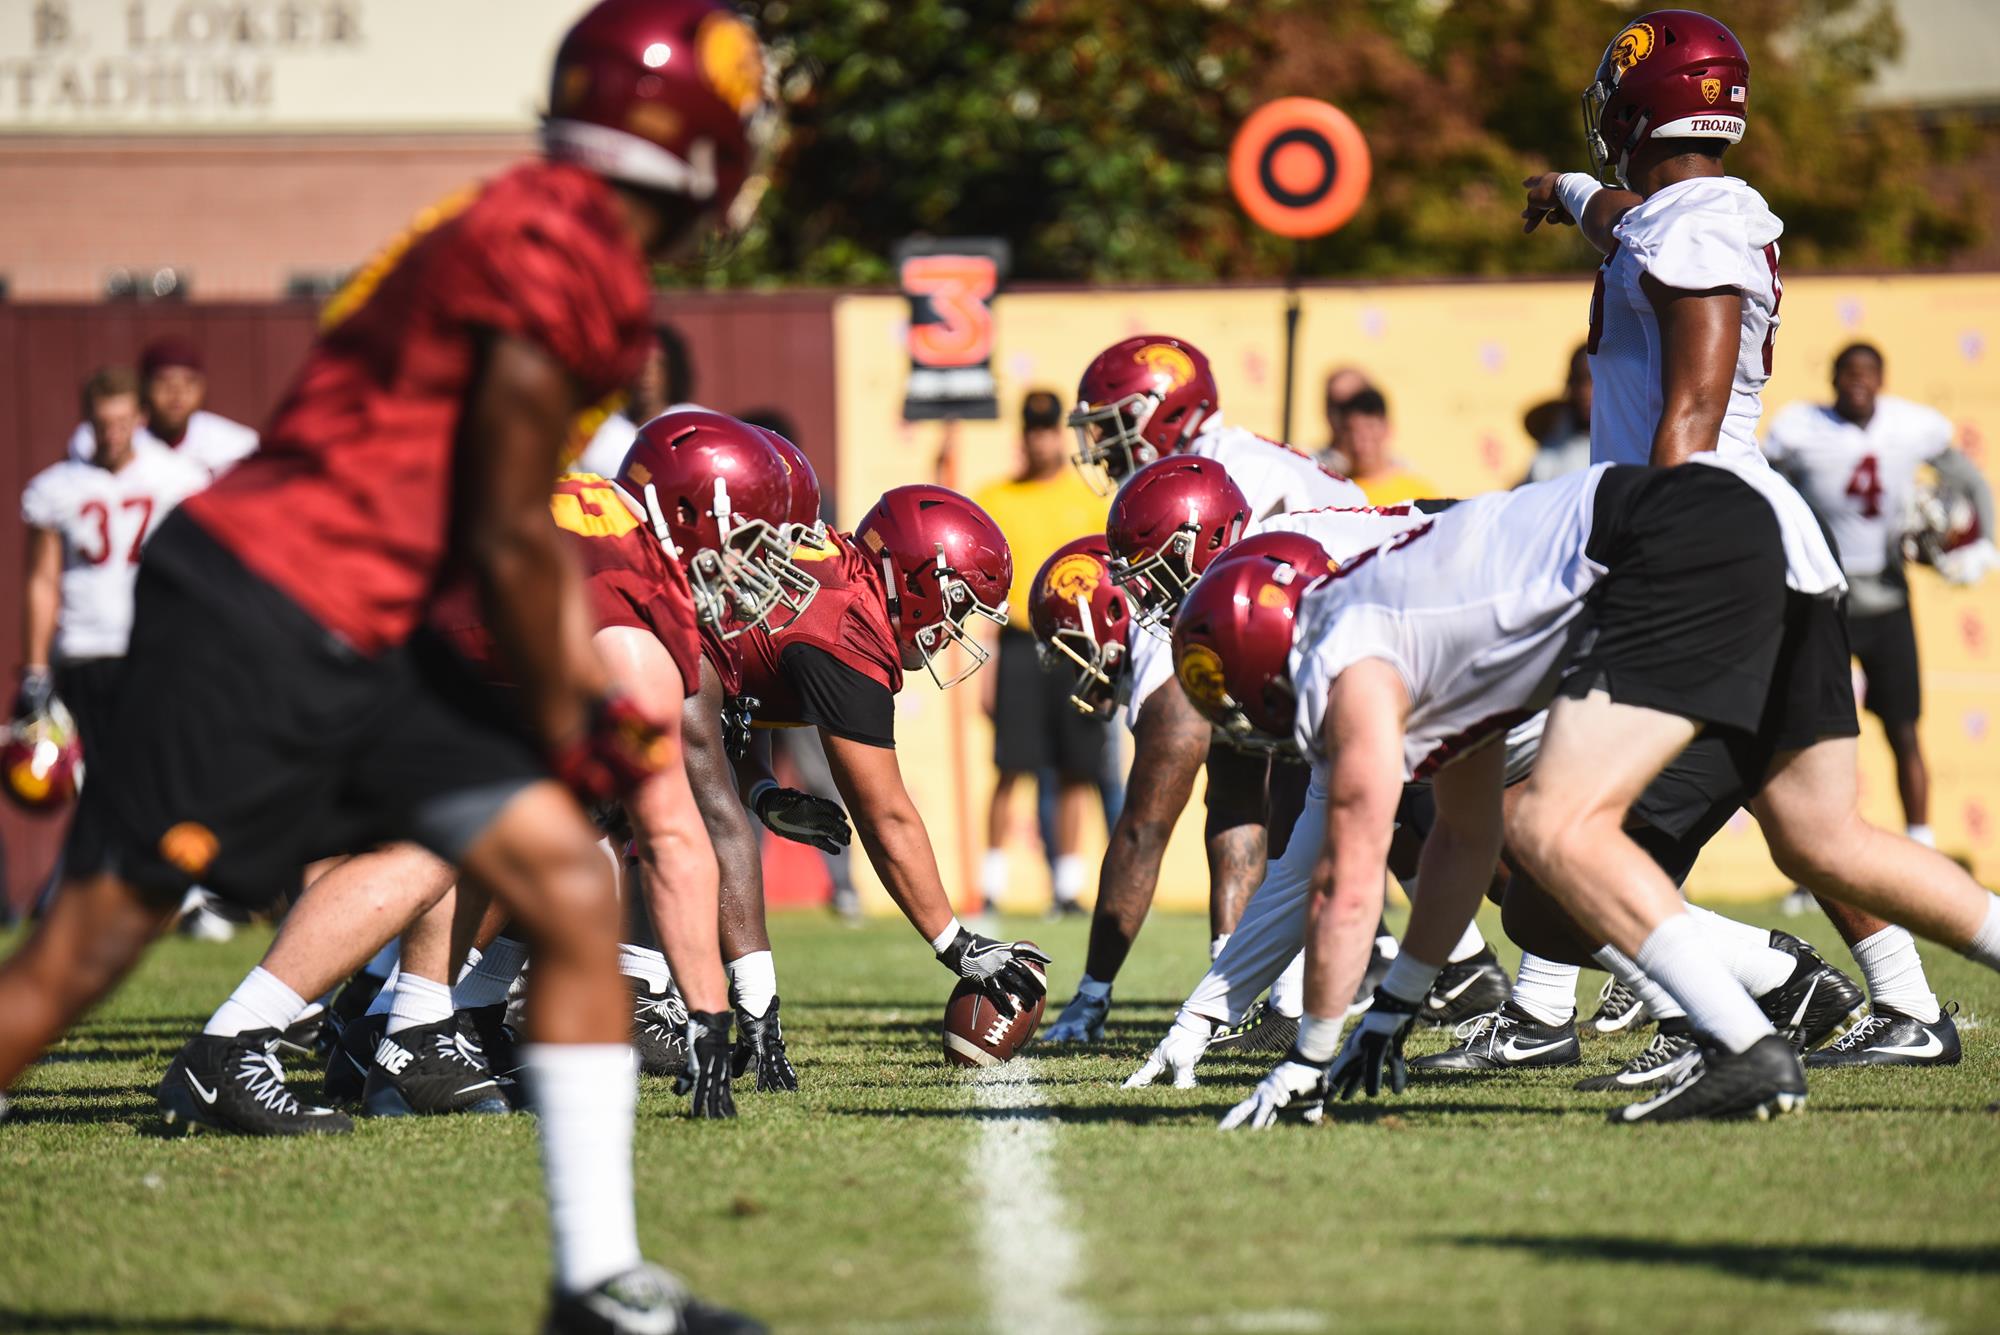 2018 USC Football Spring Practice Schedule - University of Southern ...